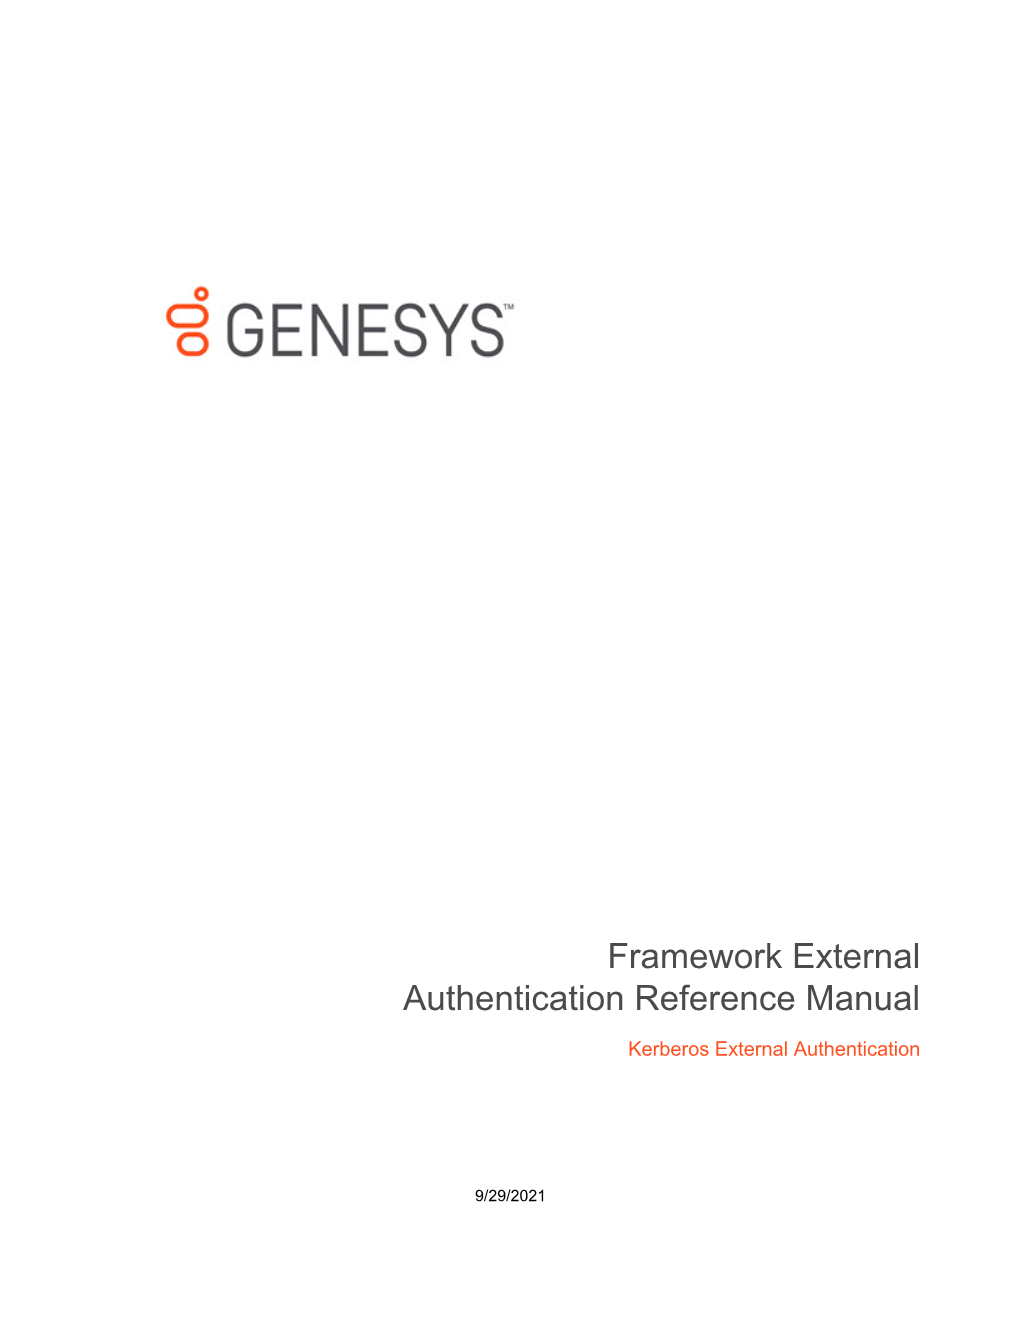 Framework External Authentication Reference Manual